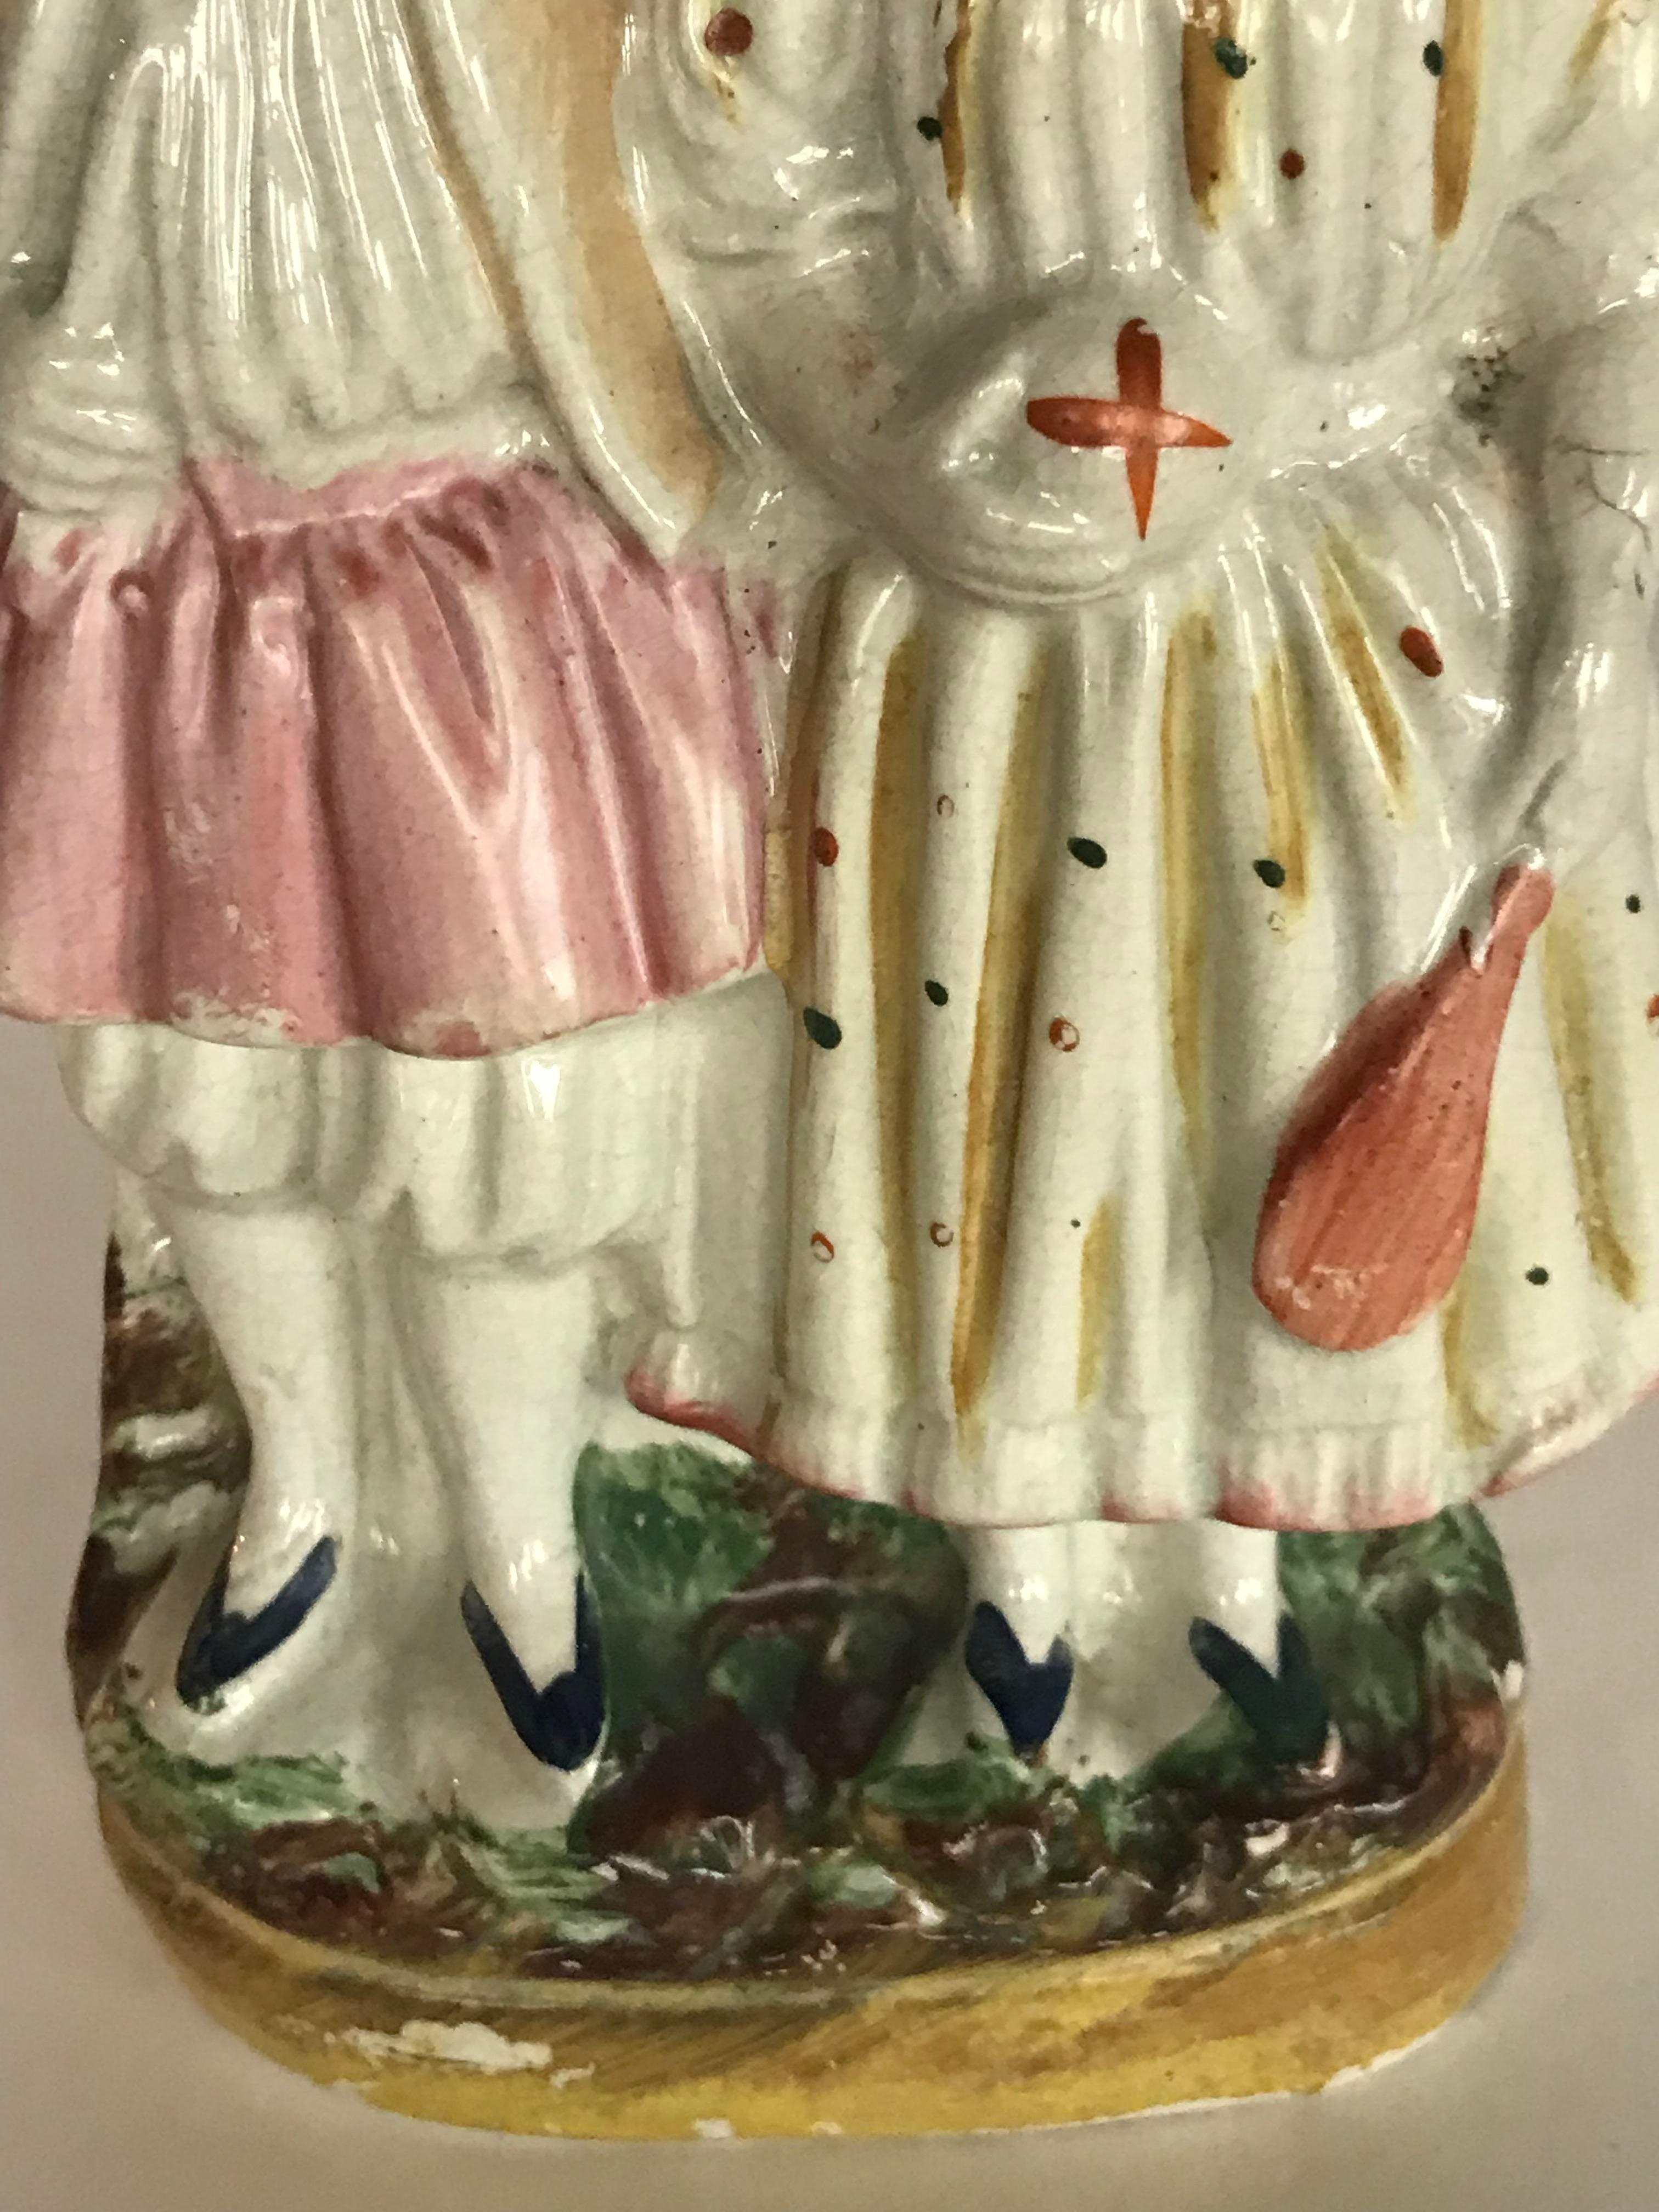 Staffordshire figure depicting 2 characters. A great traditional accent! A collectors dream.